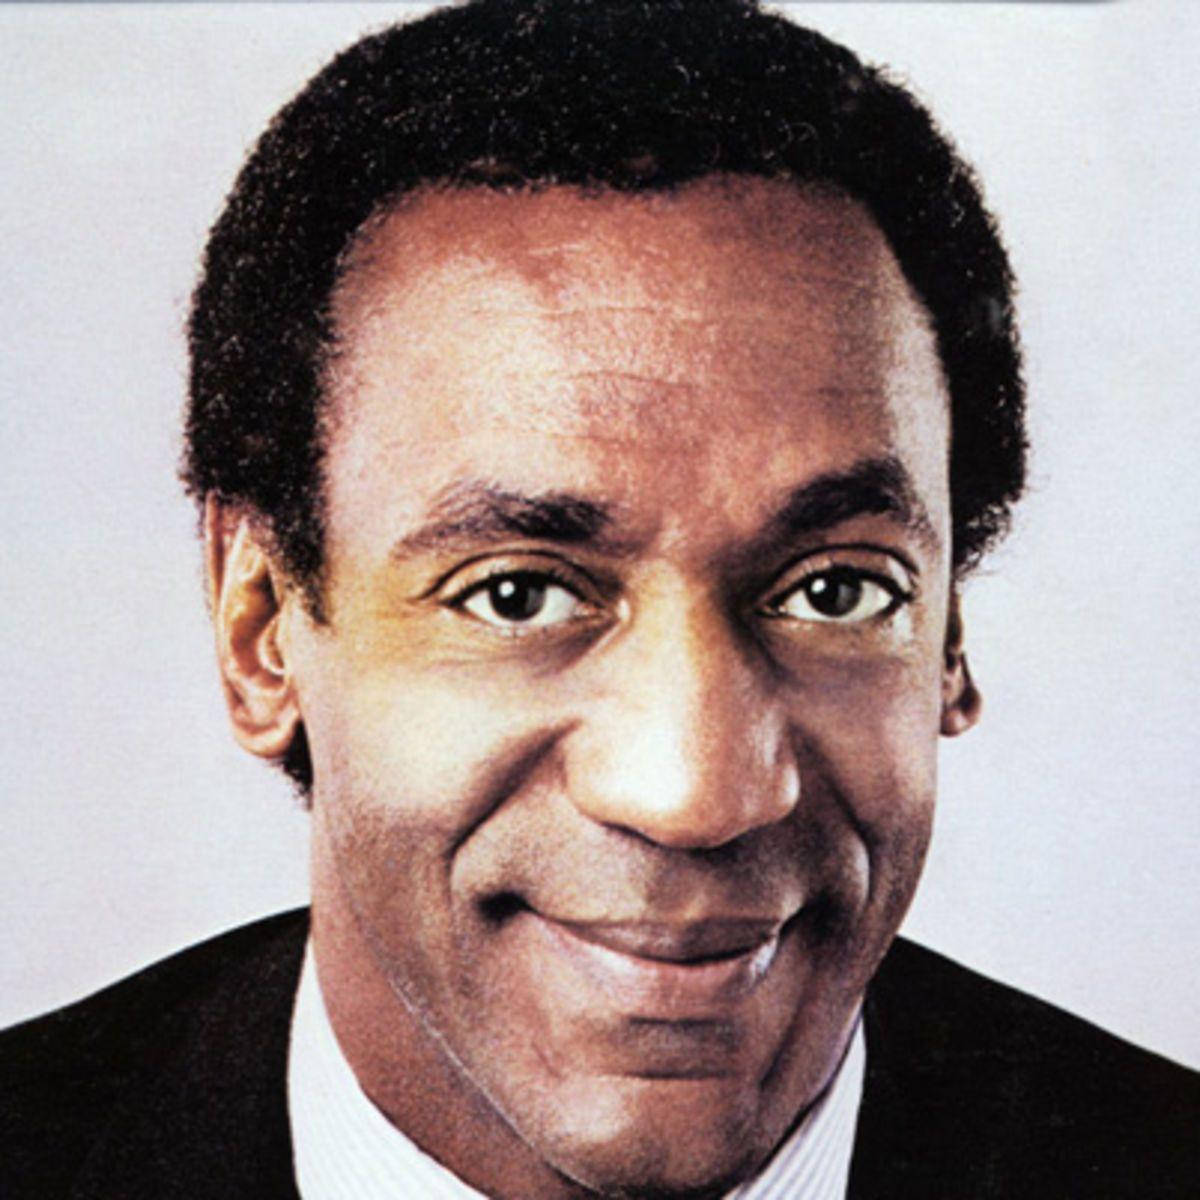 An Energetic Smile from Bill Cosby Wallpaper